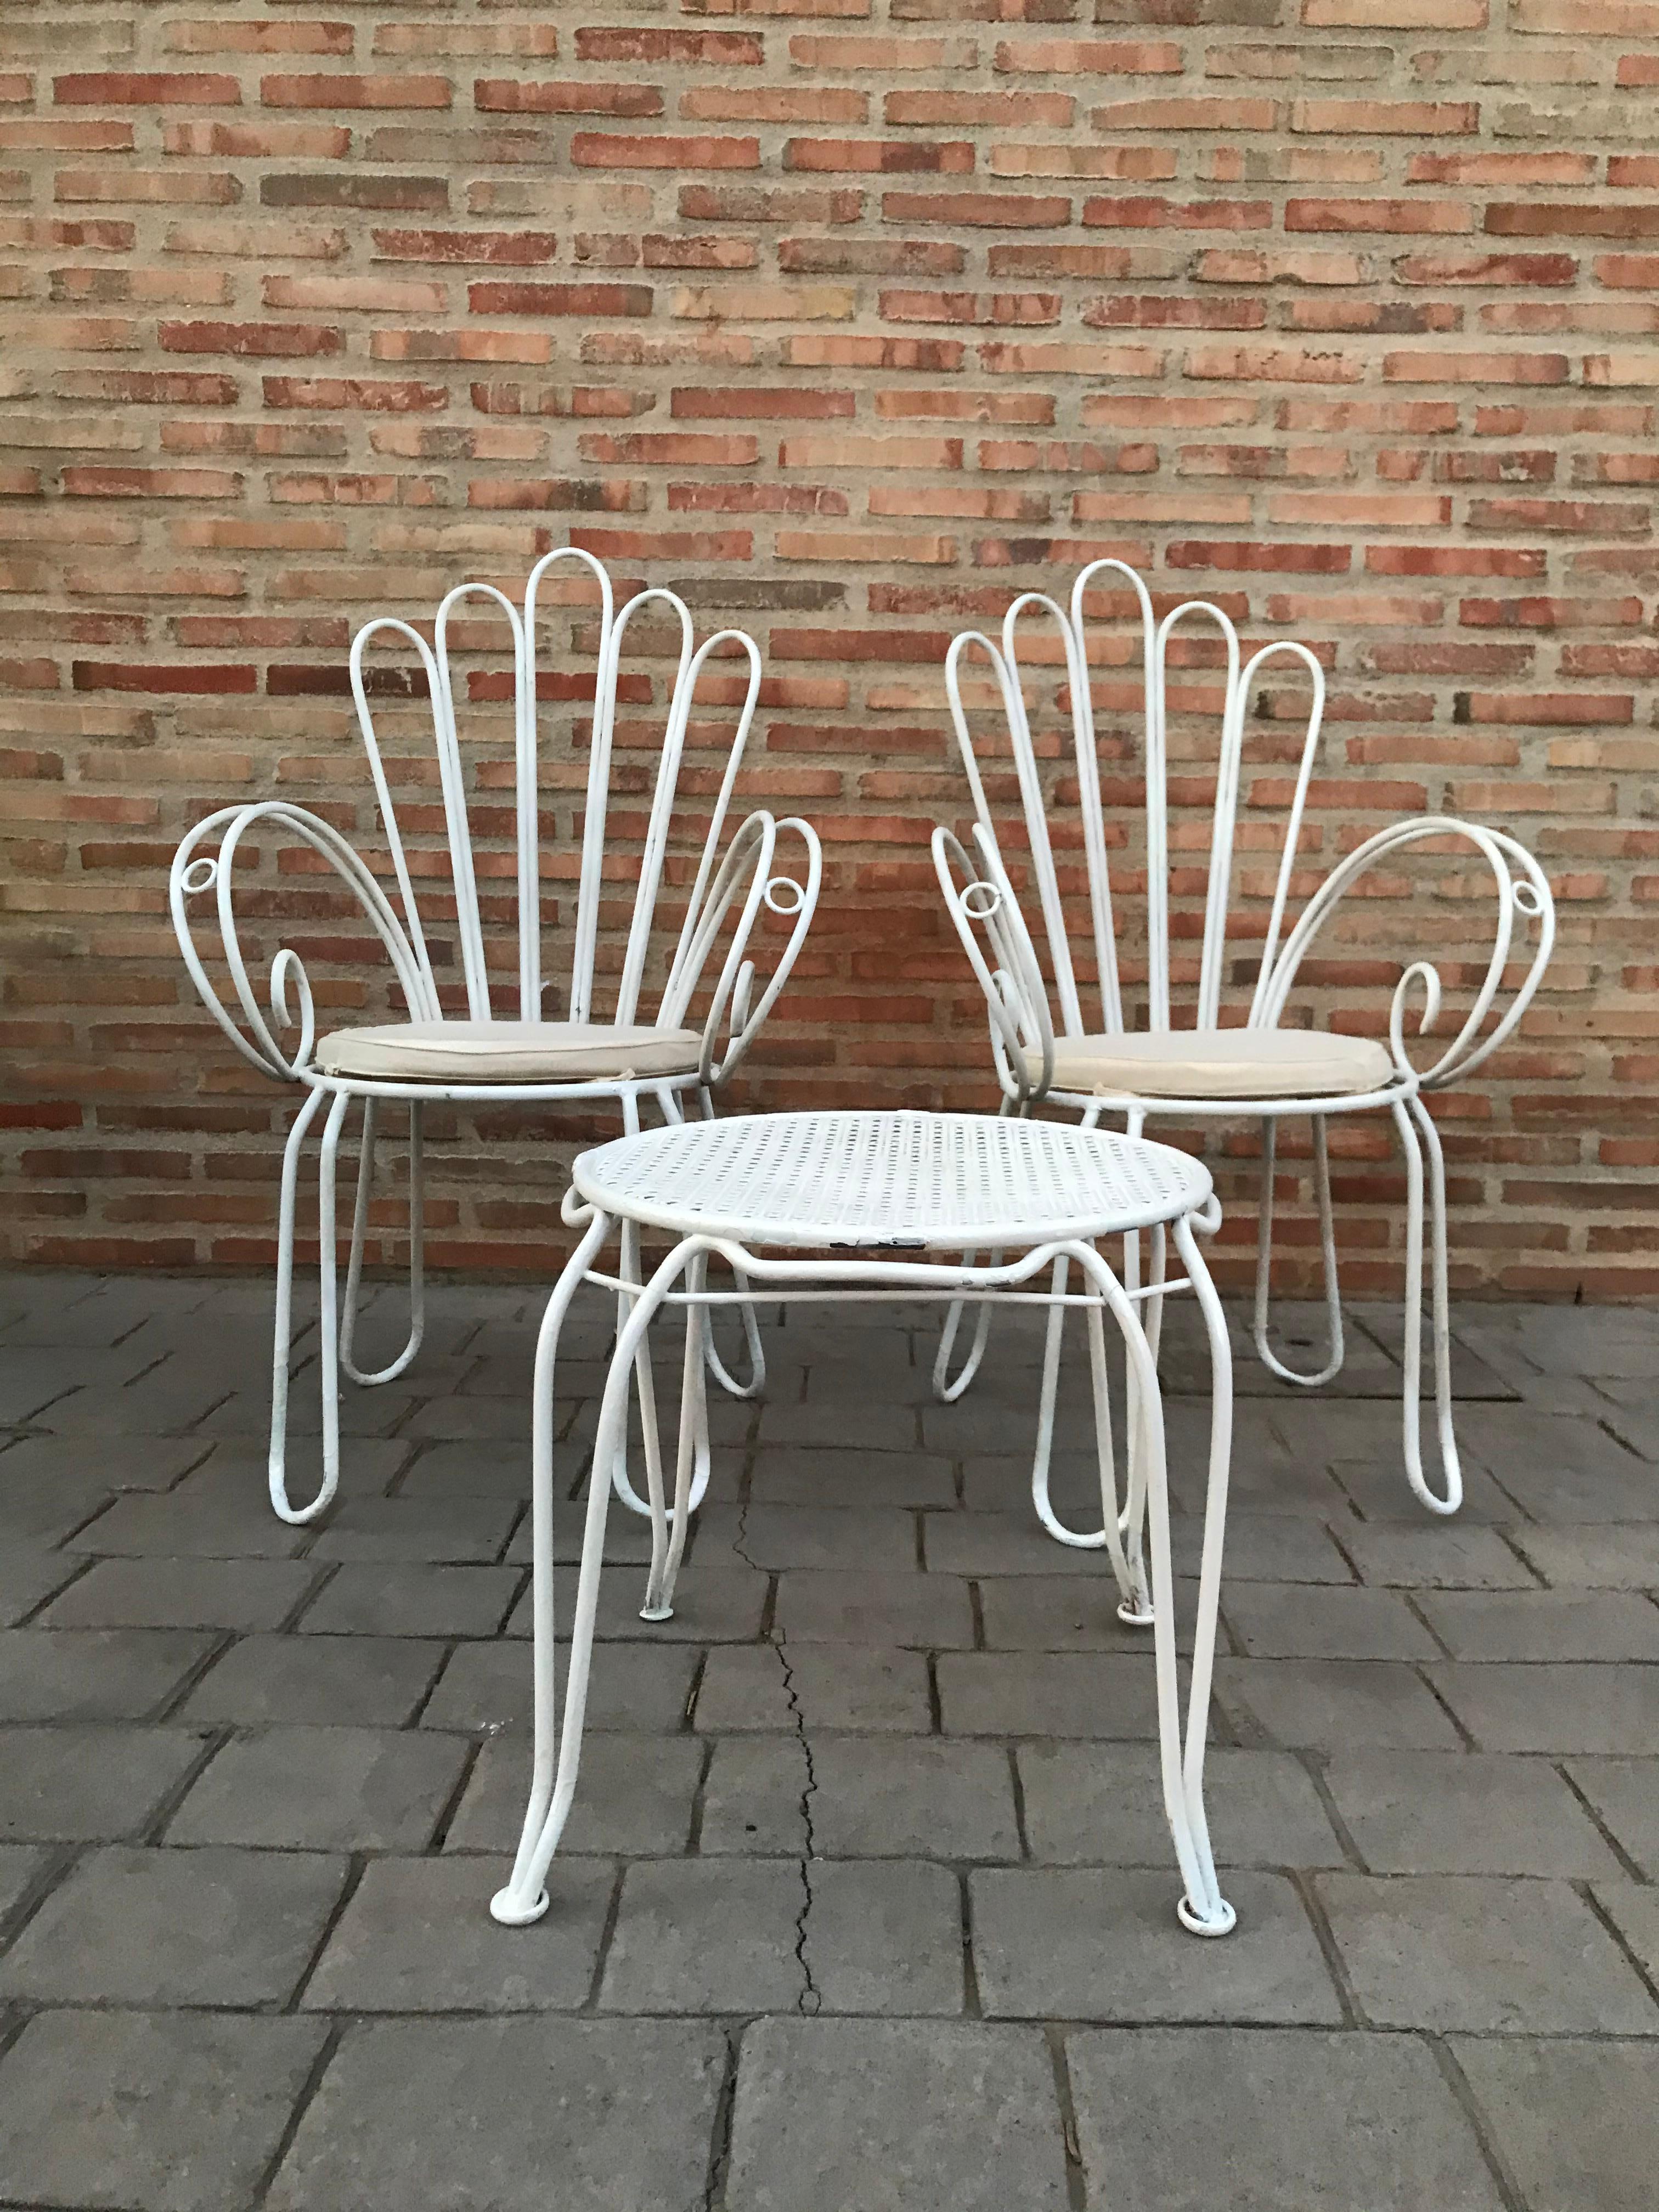 French wrought iron painting set of garden bistro outdoor

Table measurements:
Diameter 22in
Height 15.75in.

Chair measurements:
H 35.43in
W 22.44in
D 22.44in
Height to the seat 15.35in.

  